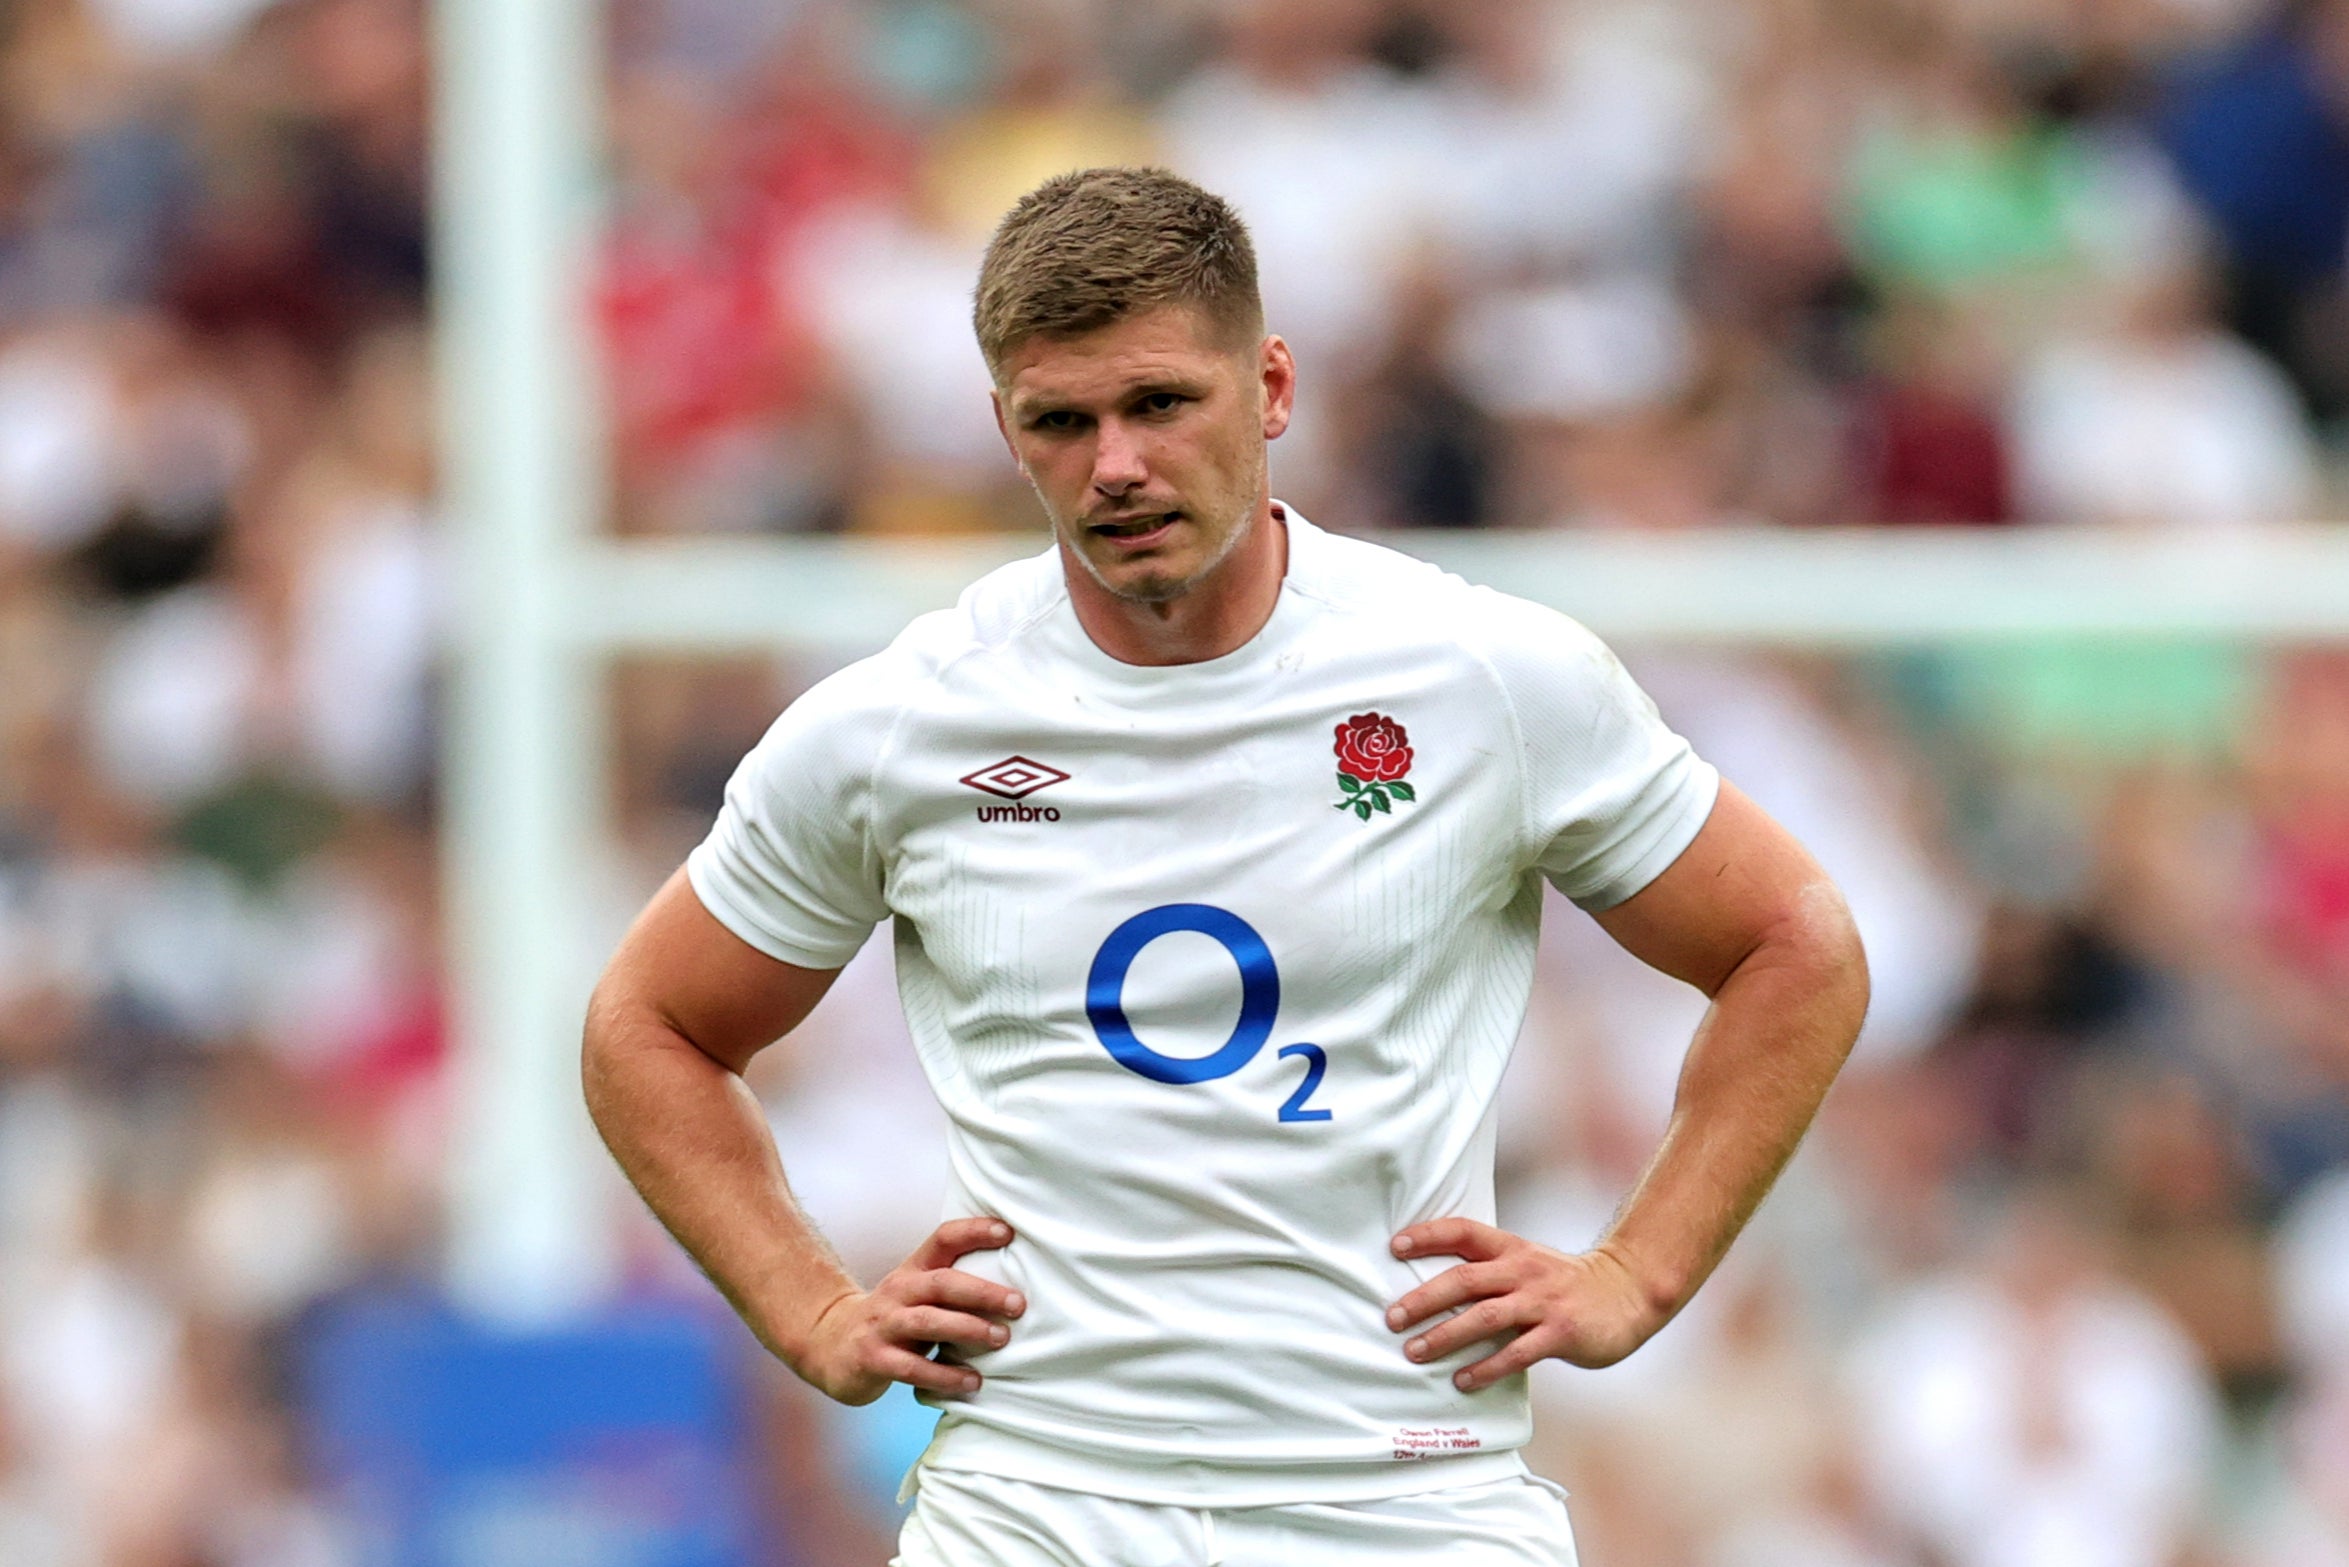 Owen Farrell of England looks dejected after being carded